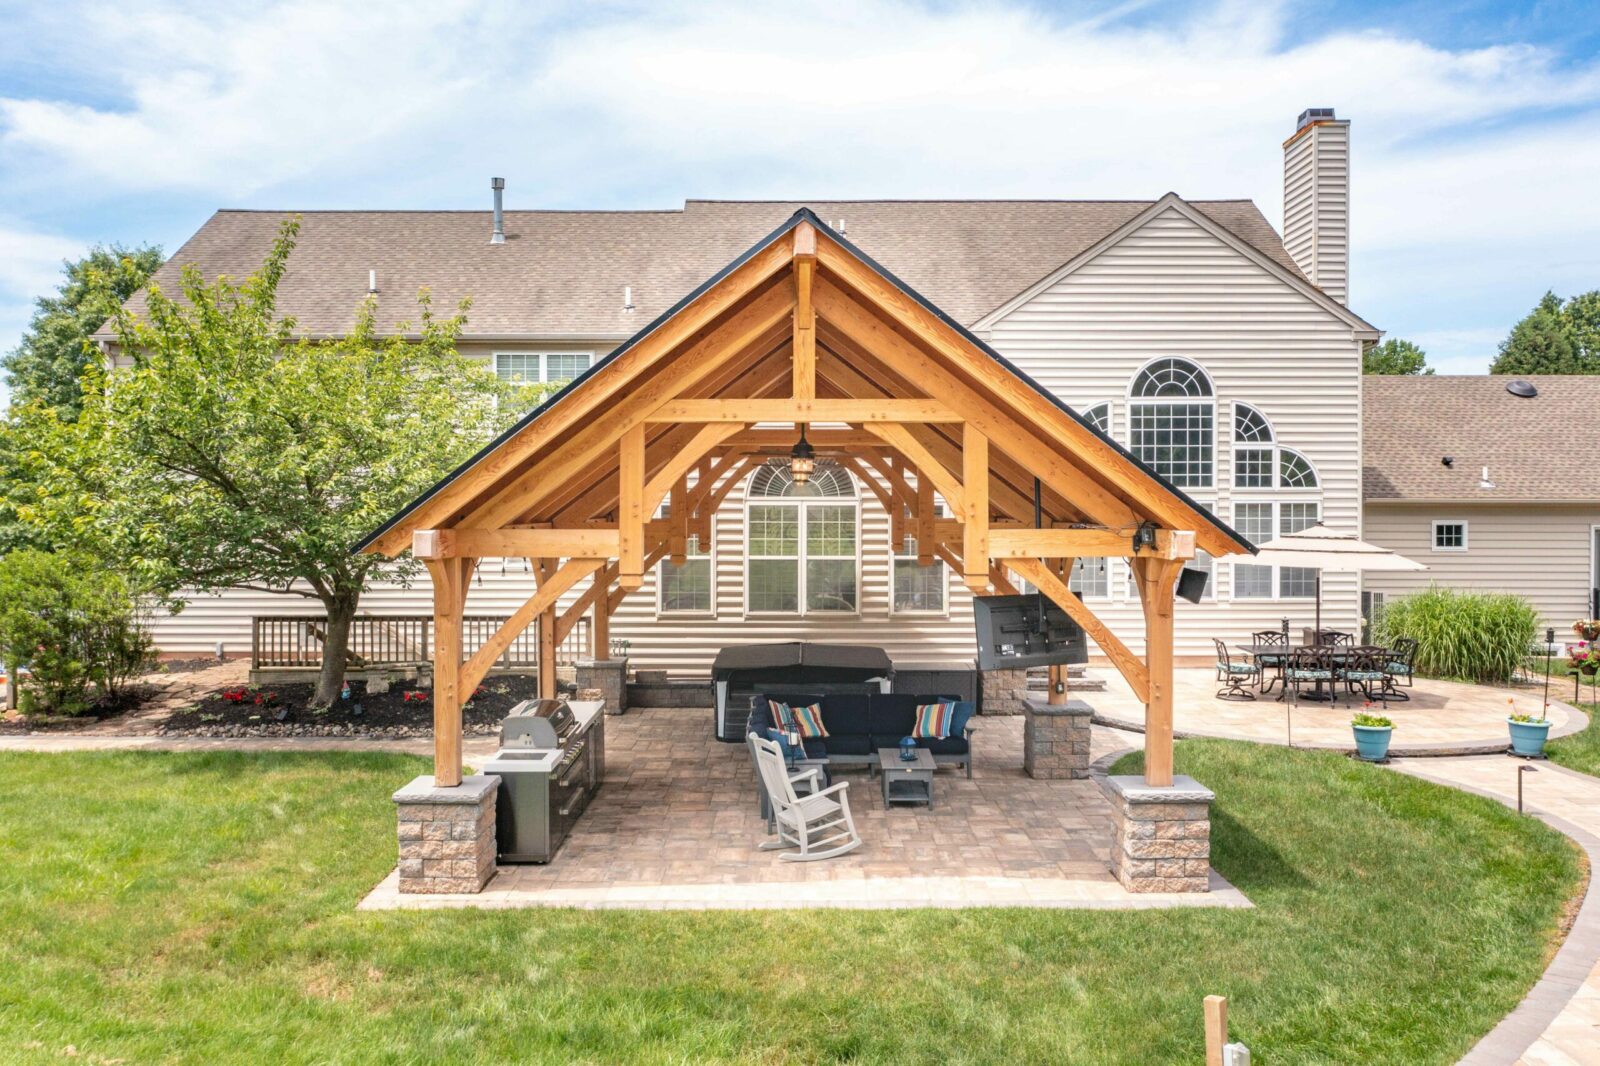 timber frame outdoor kitchen pavilion with grill